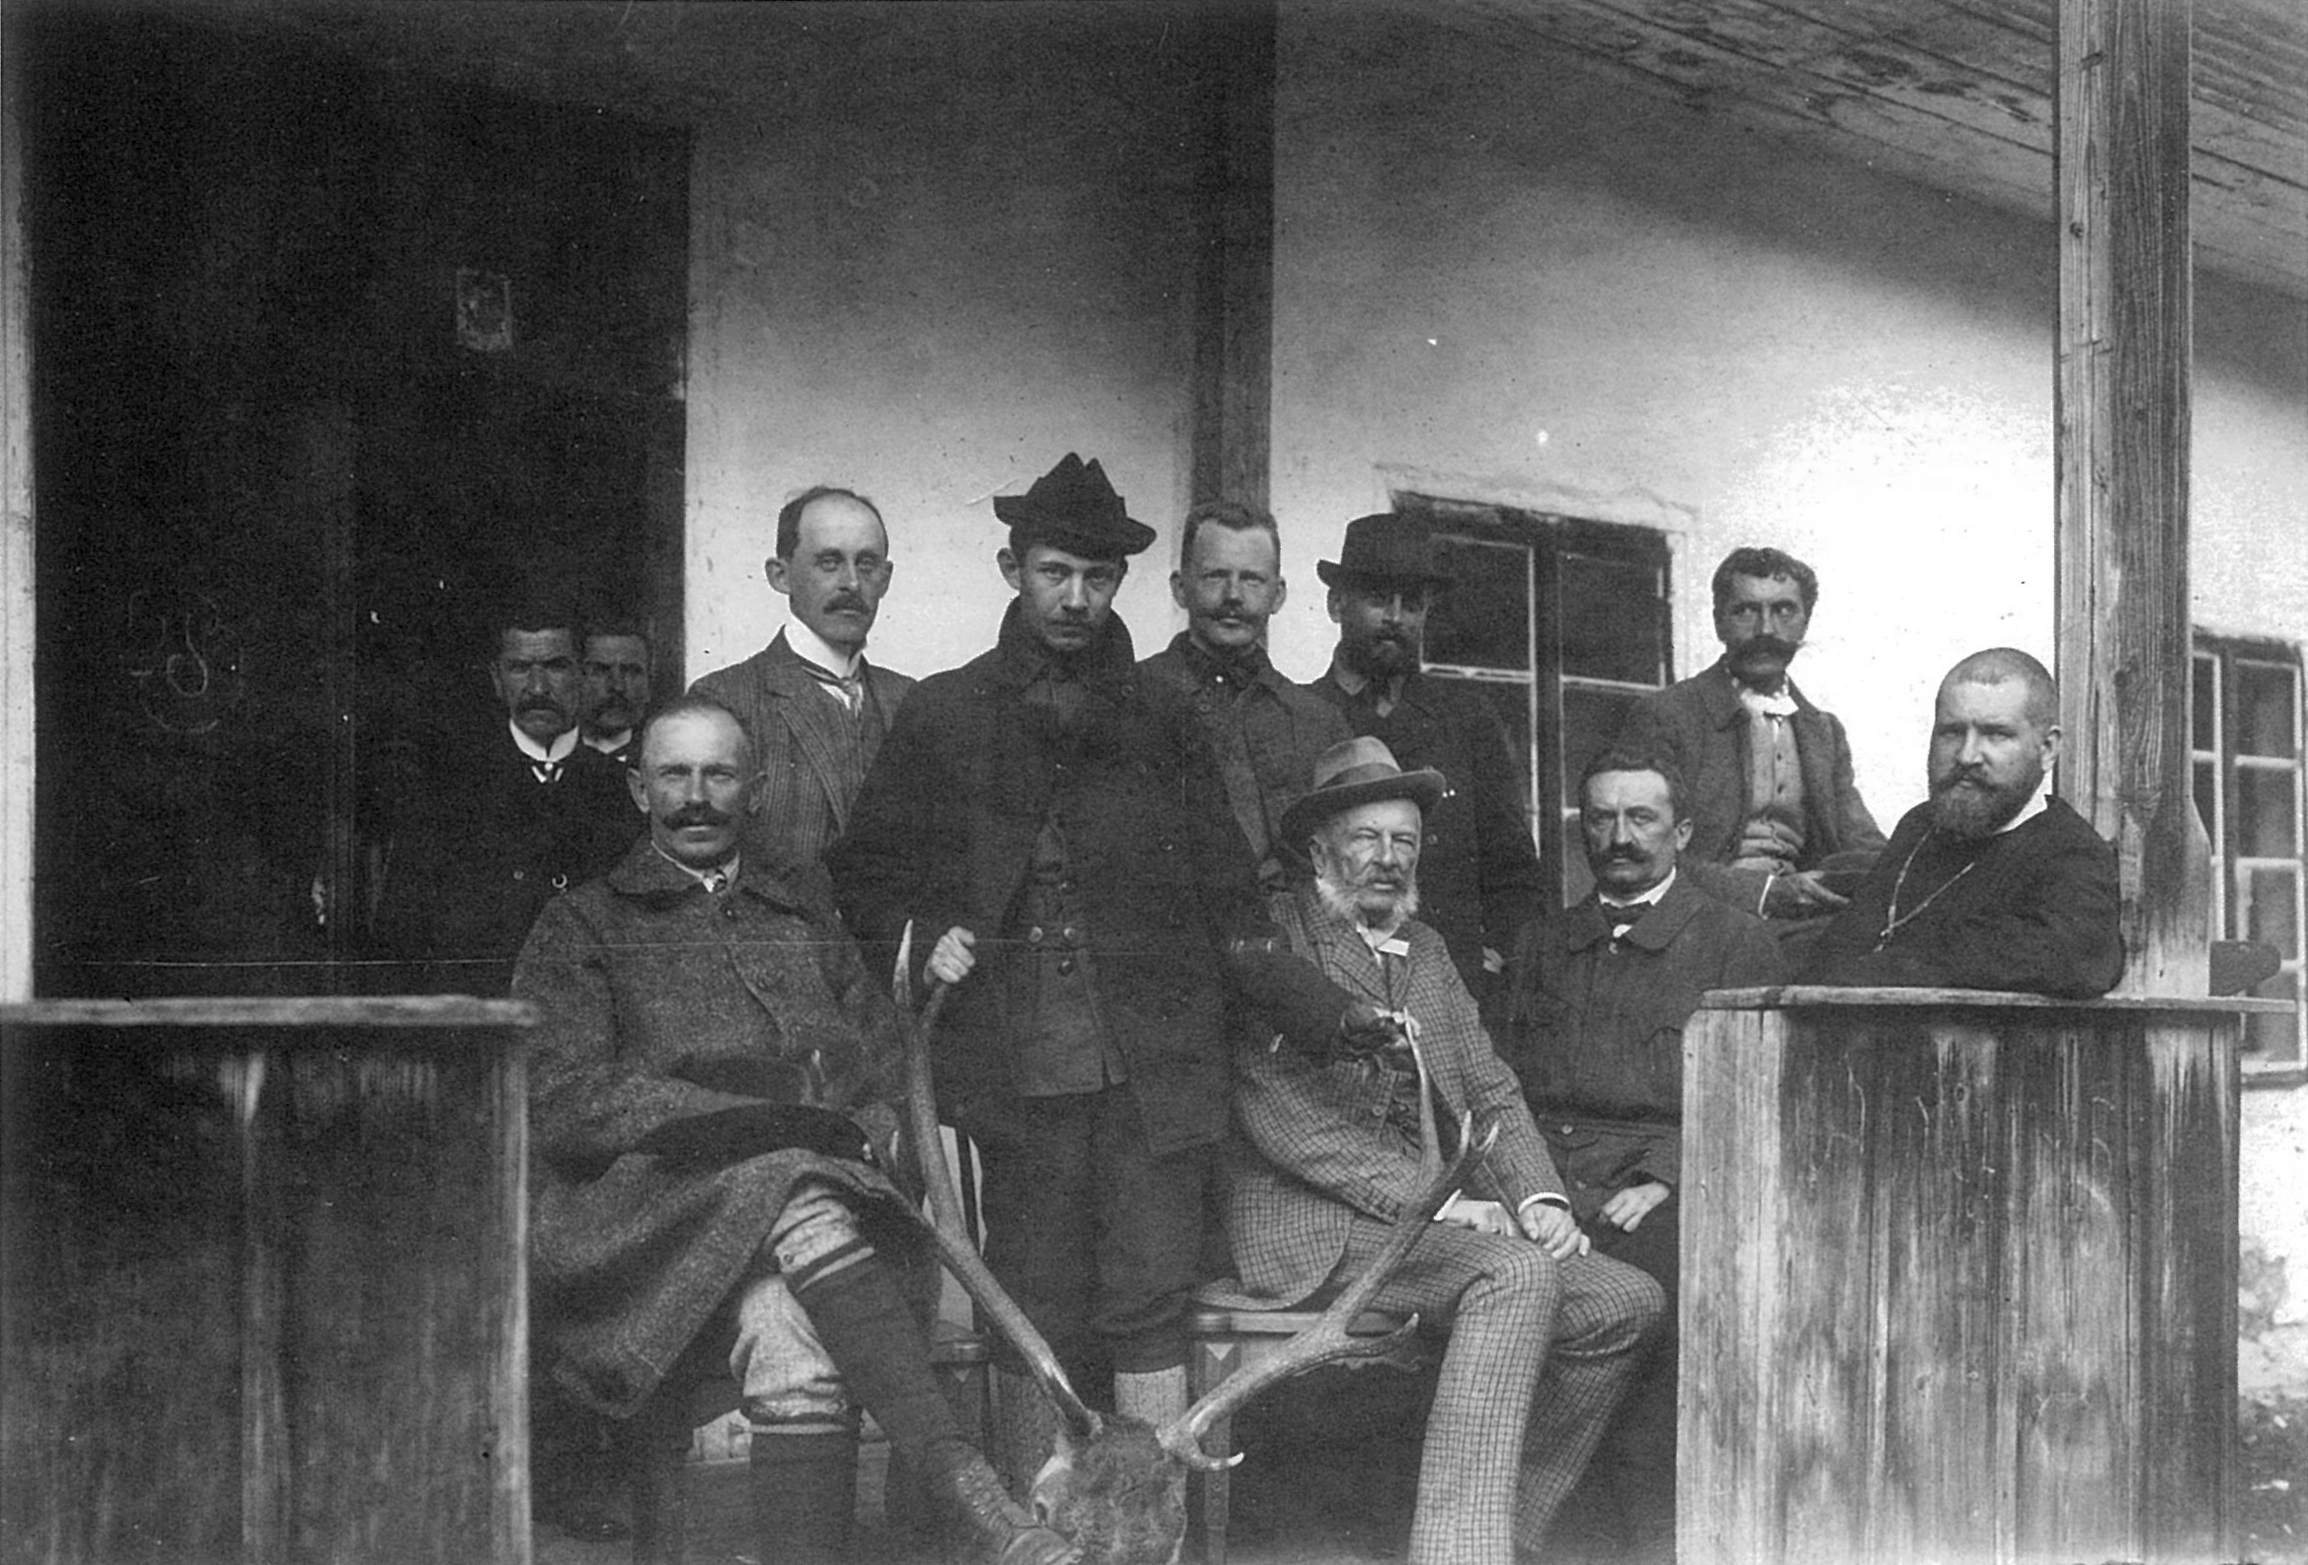 The Sheptytskyi brothers with their father and friends in the village Perehinsk in 1909.